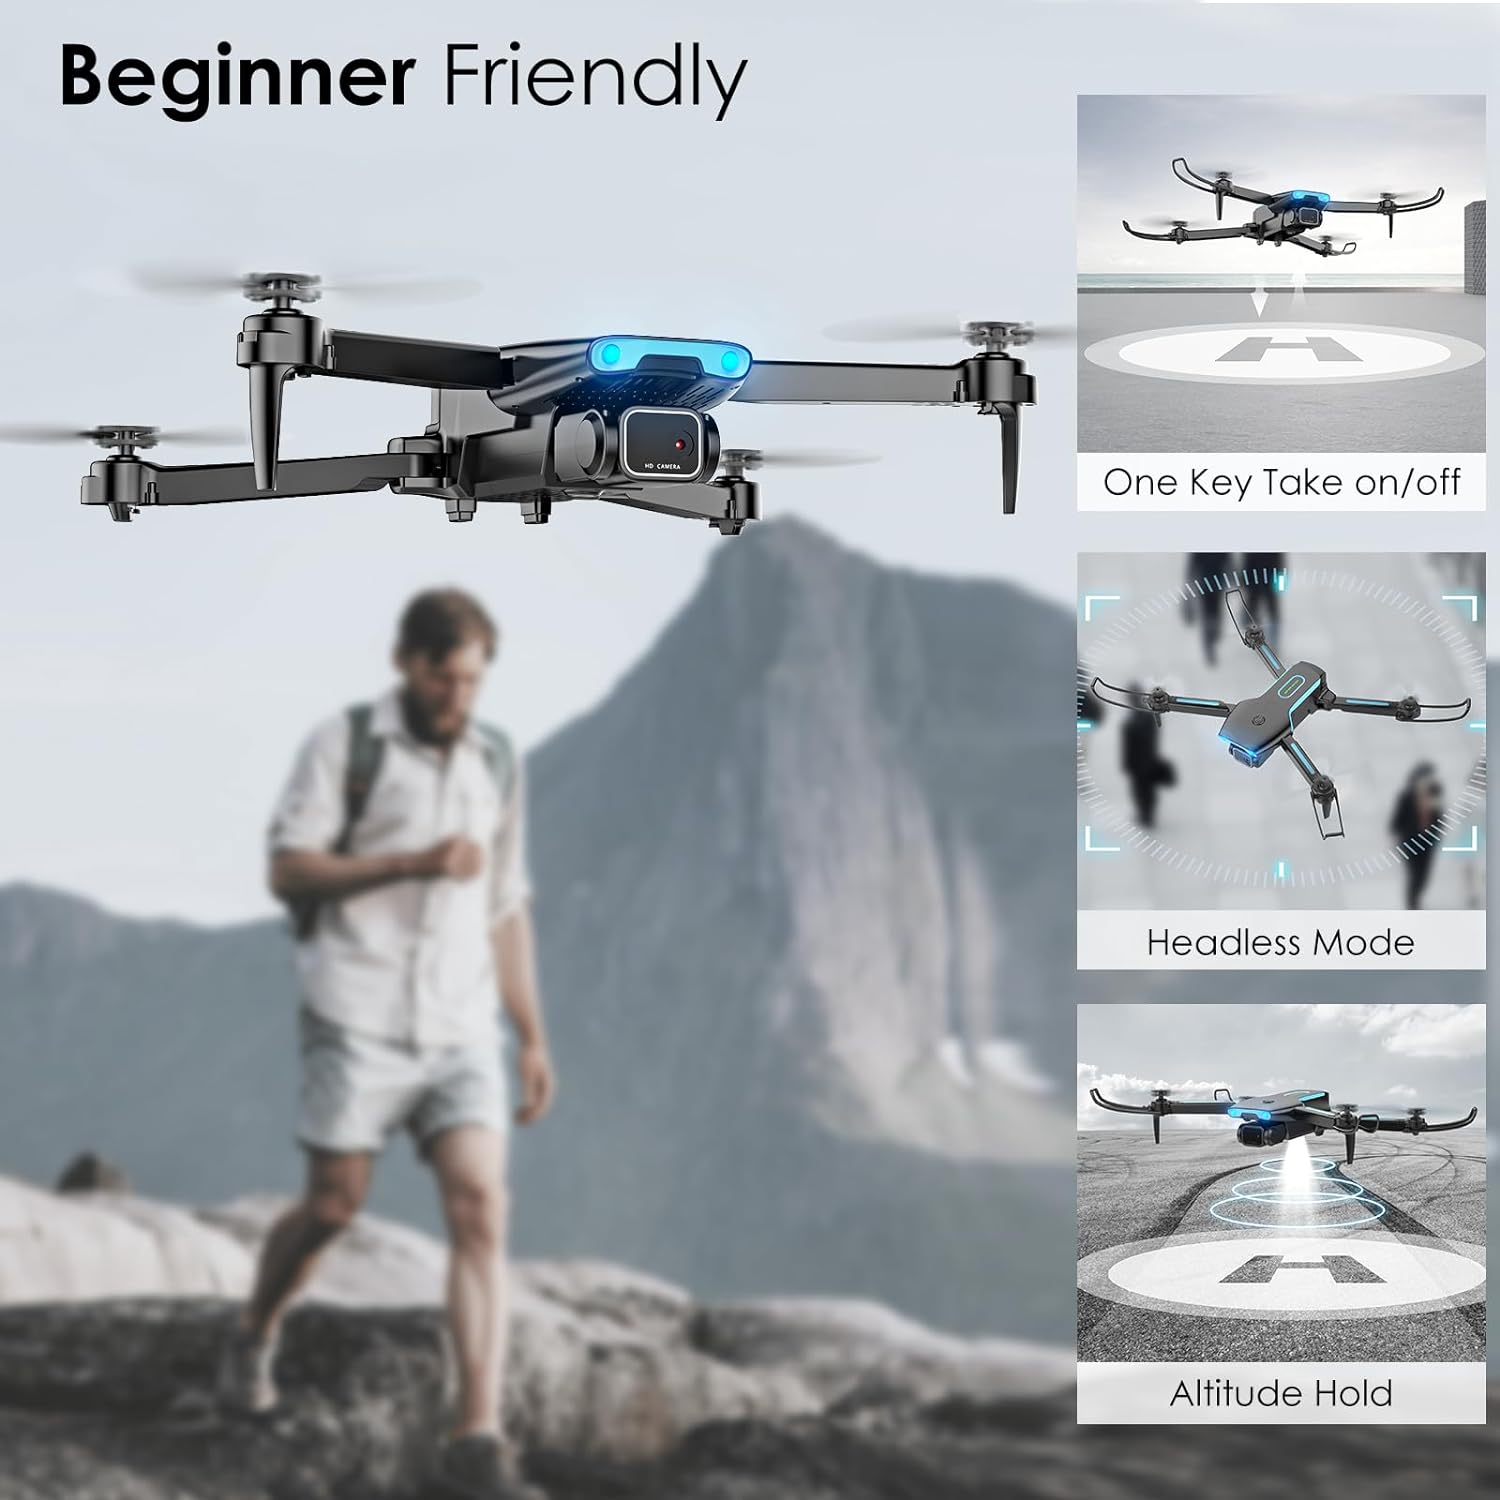 Bokigibi Drone with 1080P HD FPV Camera, RC Aircraft Quadcopter with Headless,3D Flips, One Key Start, Voice/Gravity Control, Speed Adjustment, 2 Batteries, Foldable Drone for Kids, Adults, Beginners